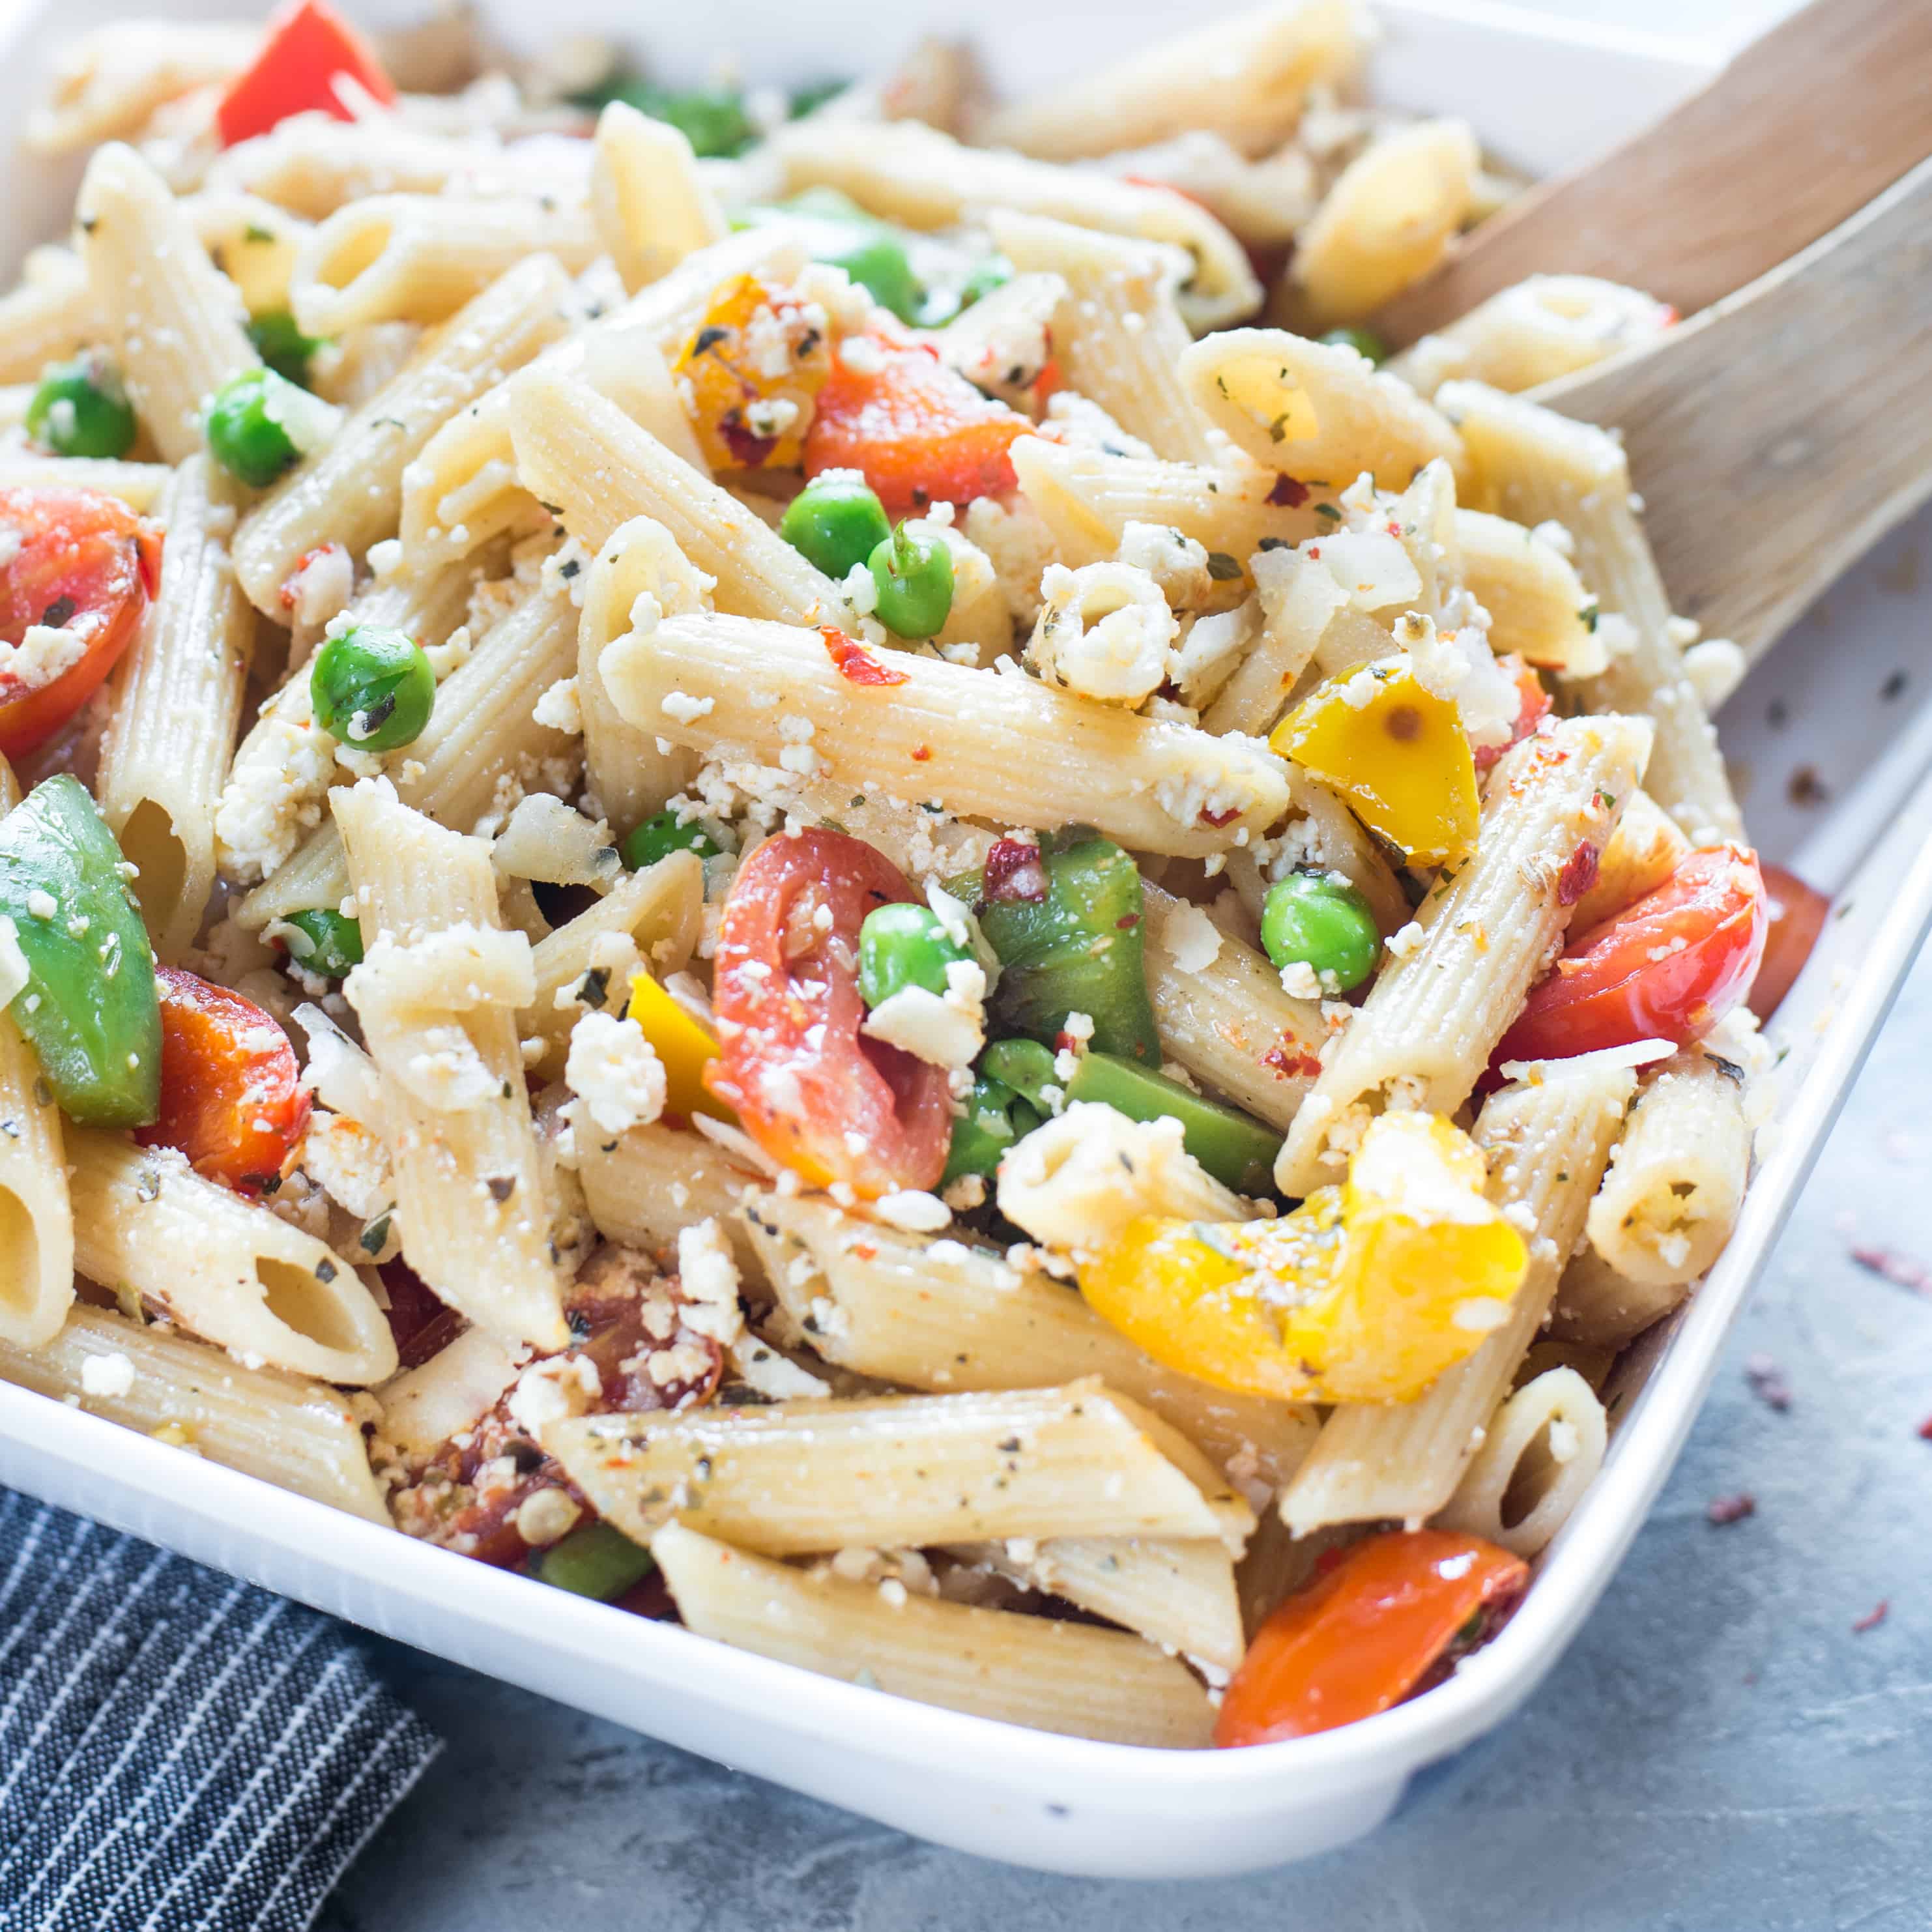 Side view of ricotta pasta salad served in serving dish, looking colorful and vibrant.